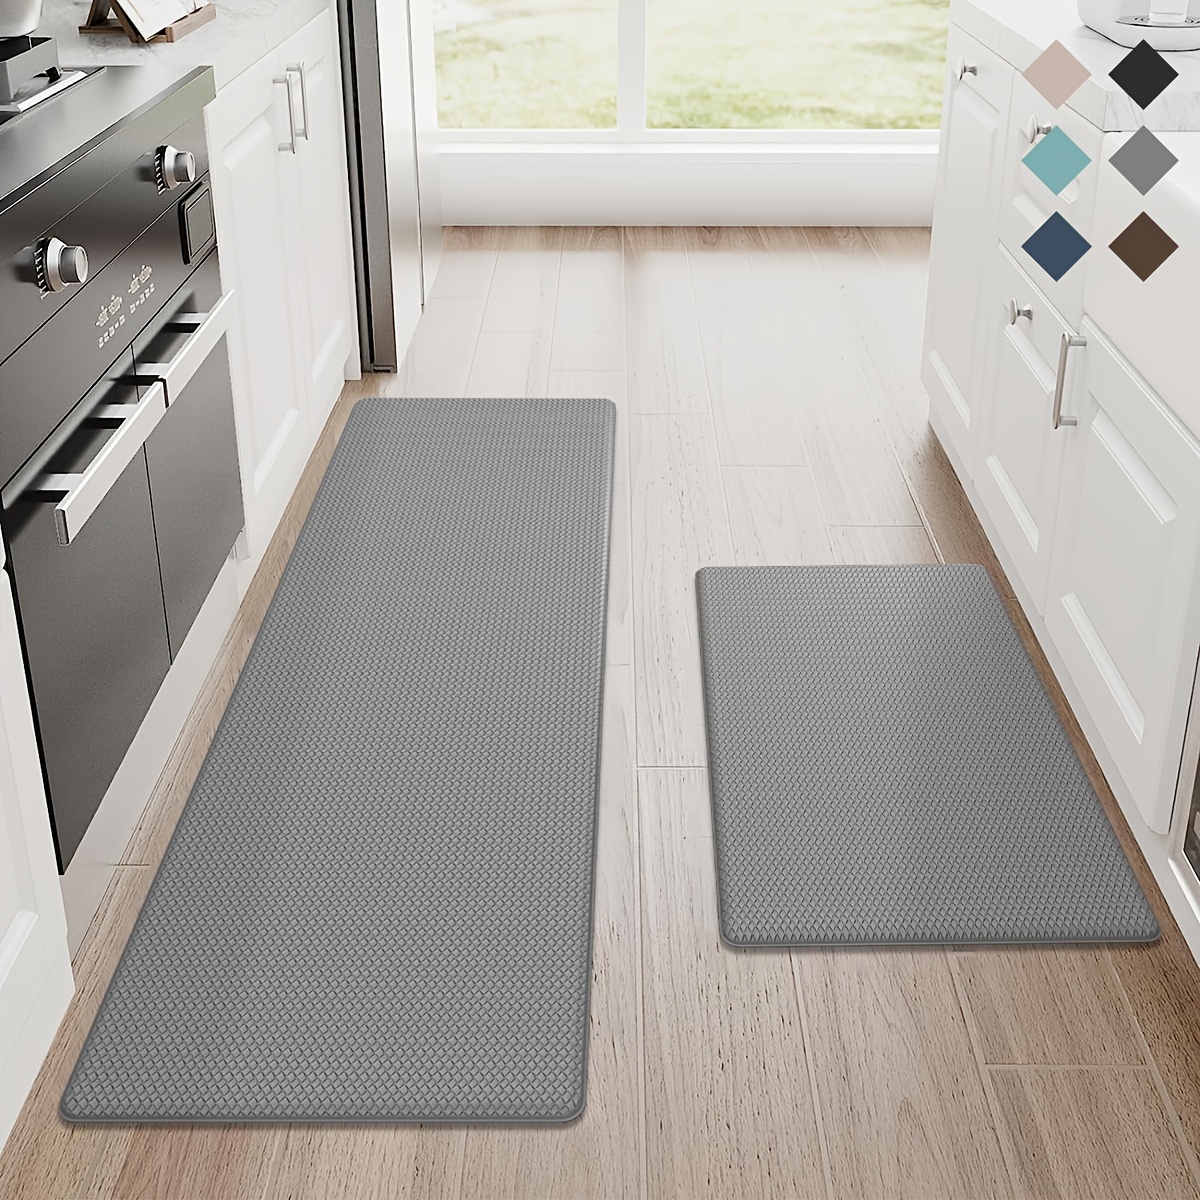 Kitchen Mats for Floor Cushioned Anti Fatigue Mats for Kitchen